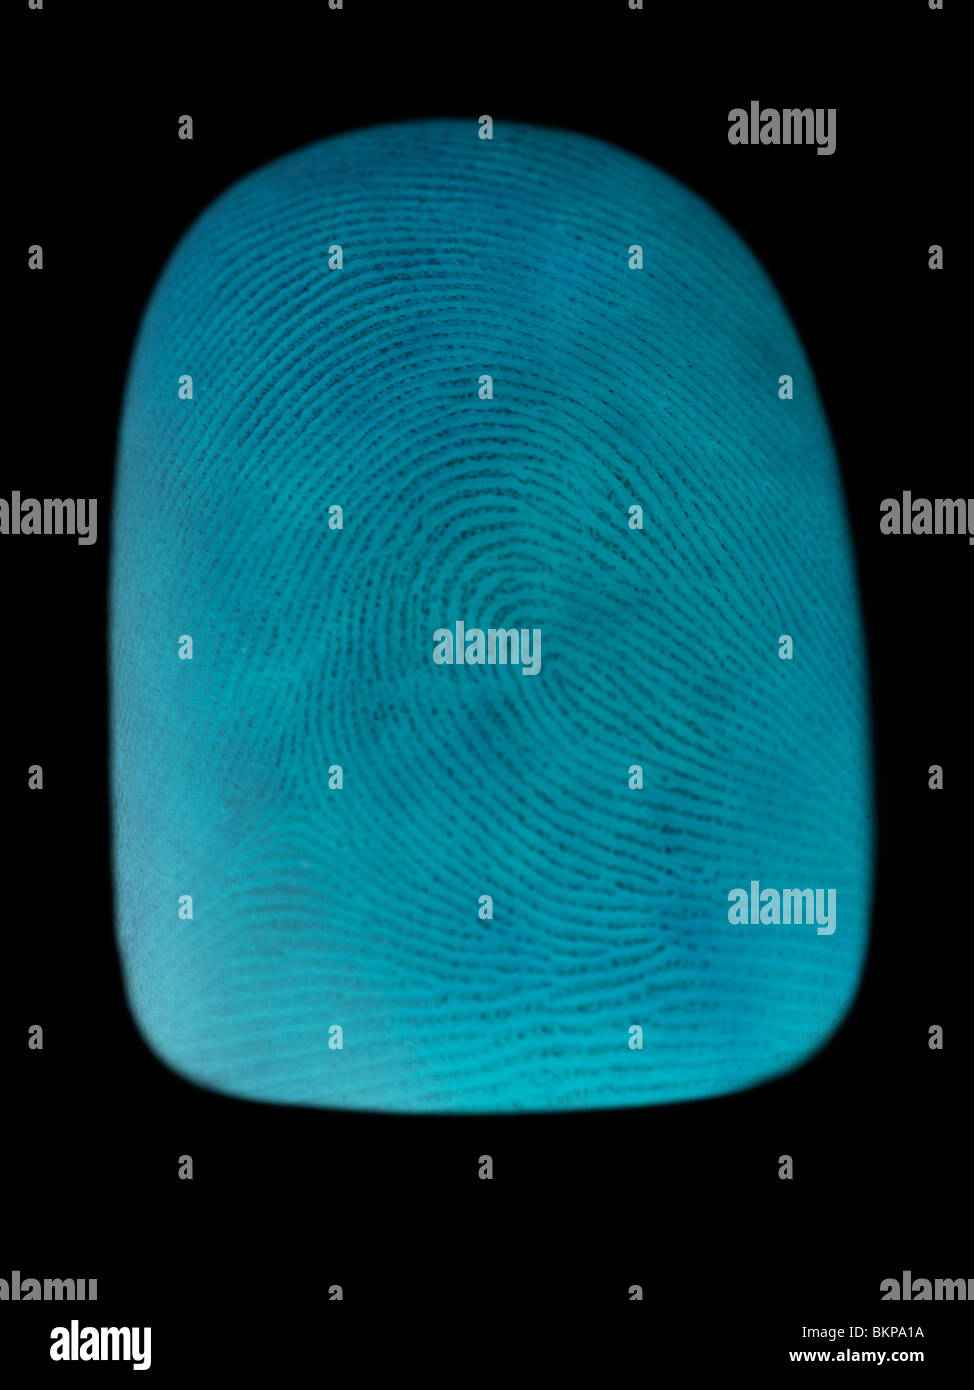 Simulated computer enhancement of a man's thumbprint. Stock Photo